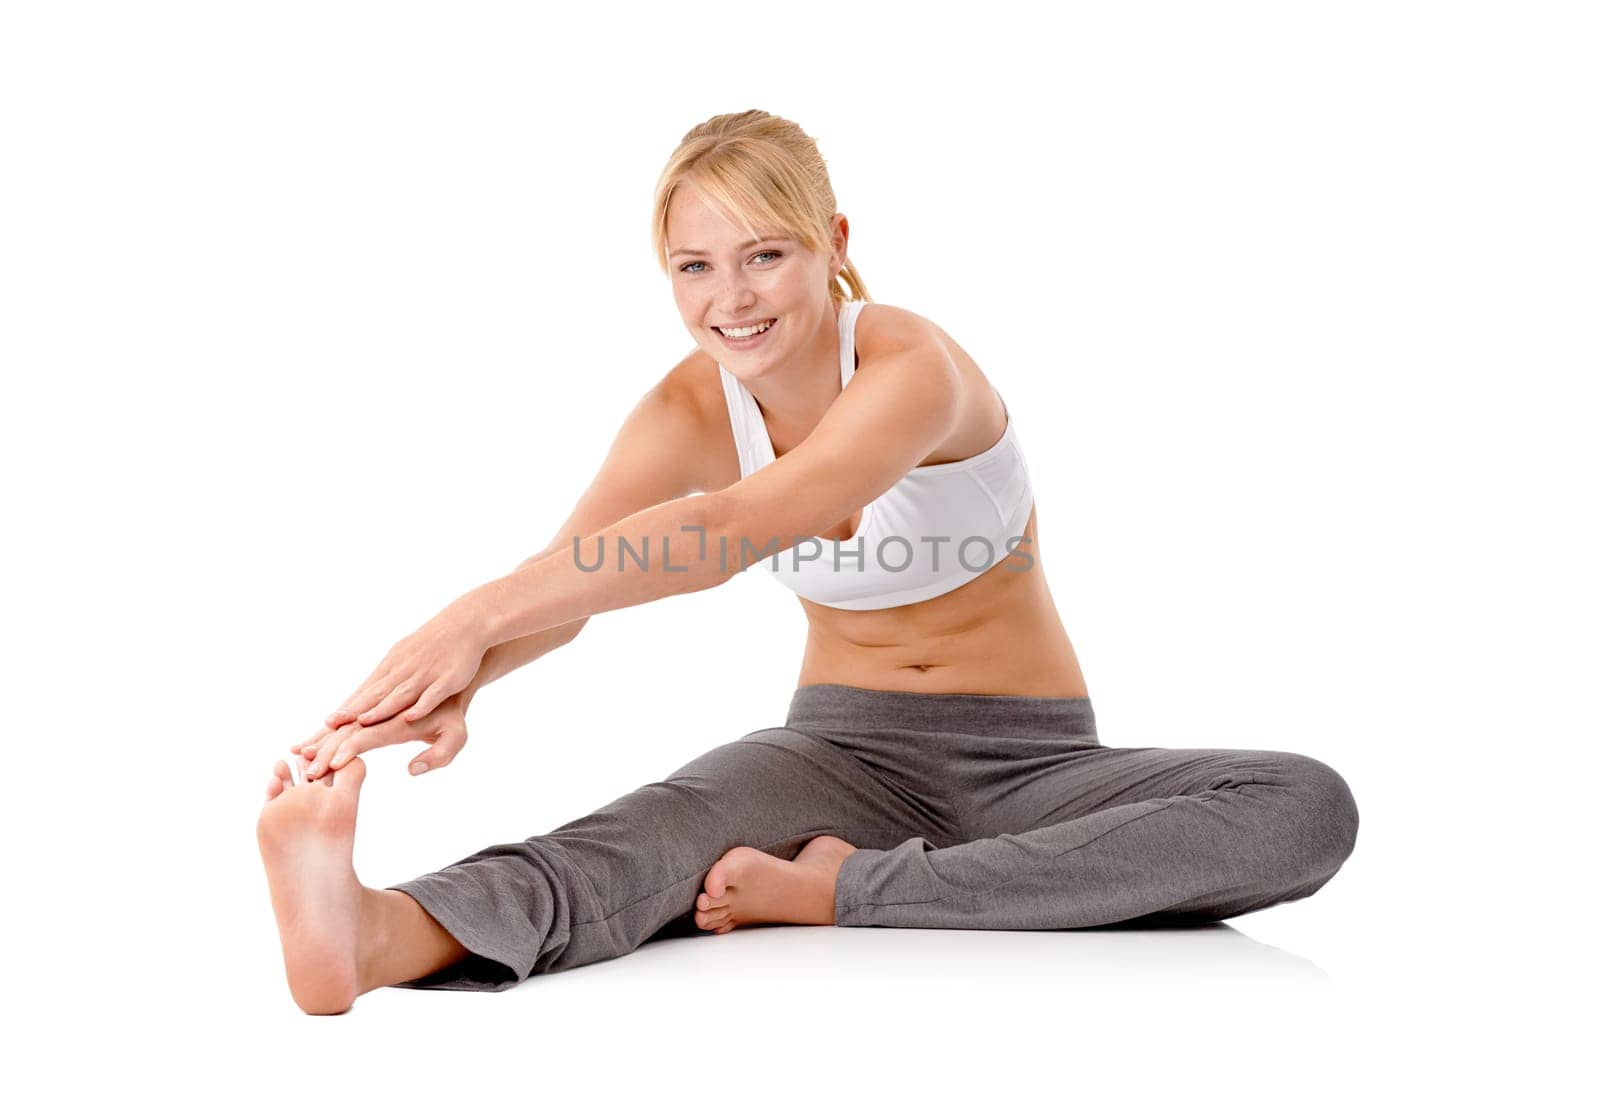 Staying fit and healthy. Full length shot of a young woman exercising on the floor isolated on white